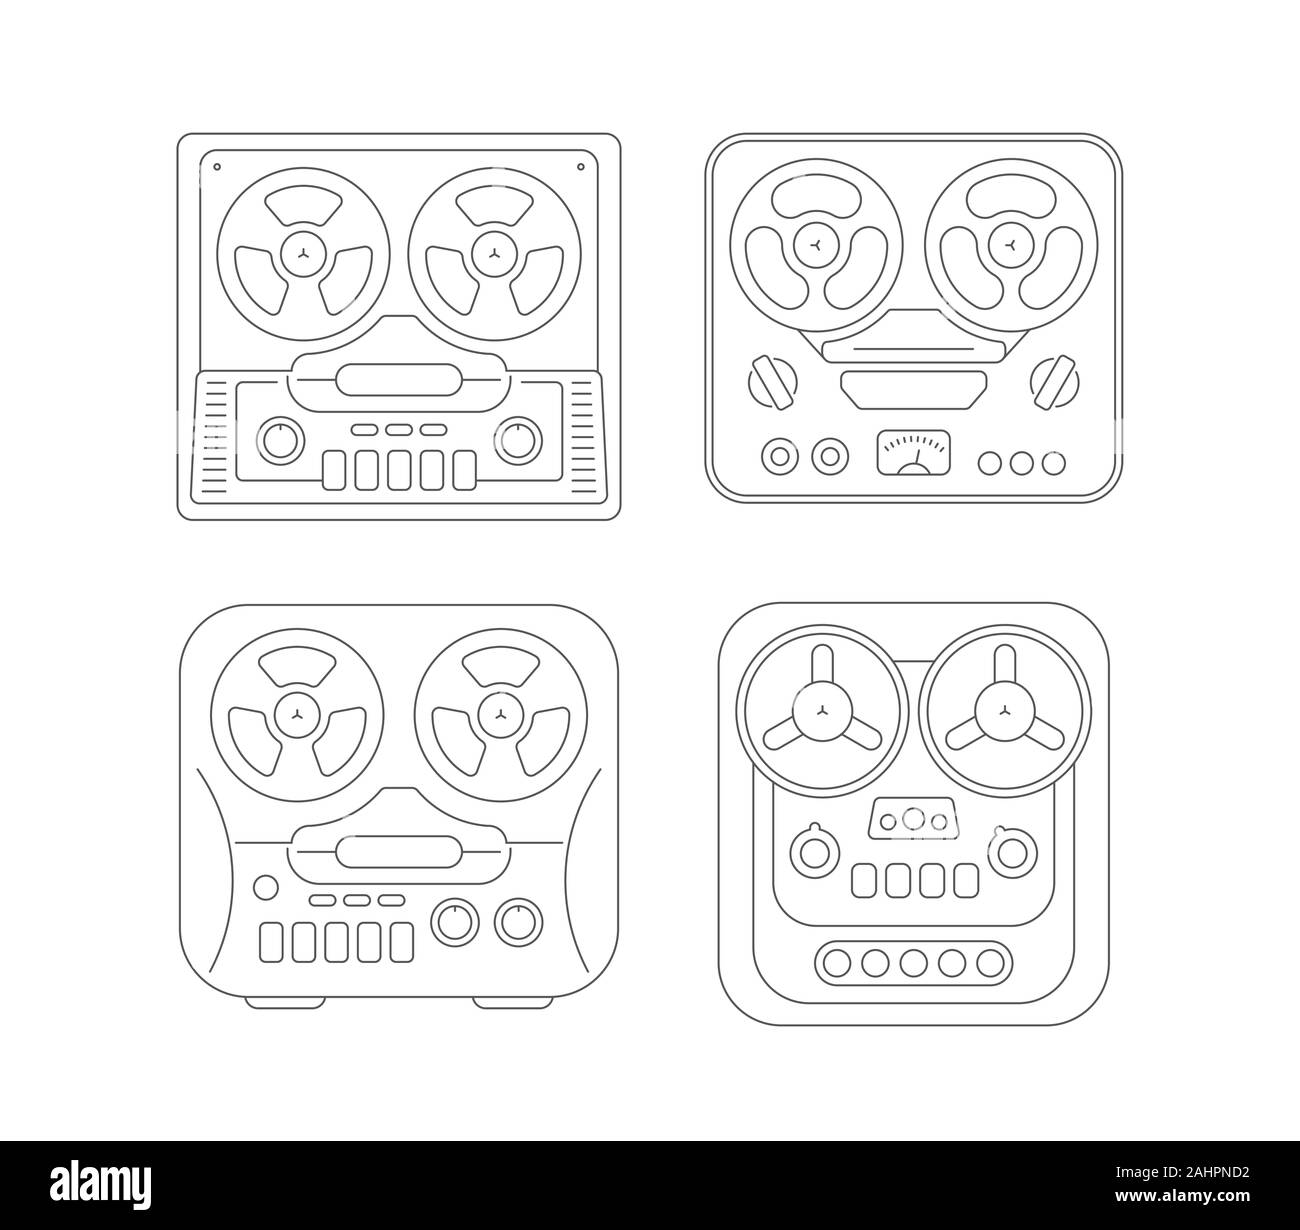 Grey line art images isolated on a white background Retro Tape Recorders vector illustration. Four unique design elements. Stock Vector